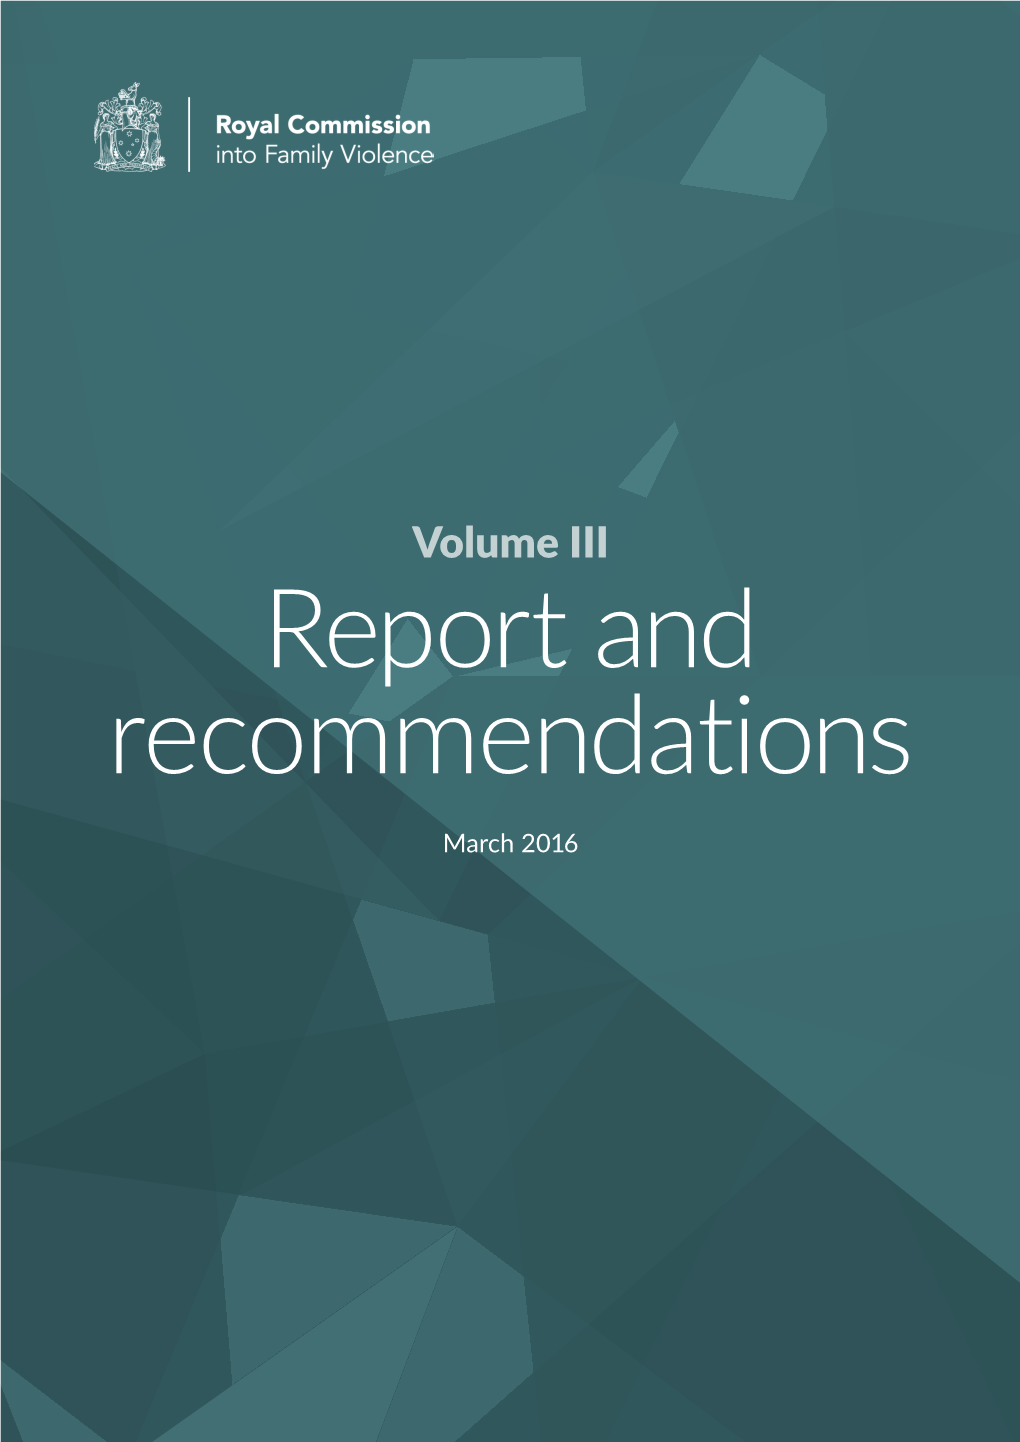 Royal Commission Into Family Violence Volume III Report and Recommendations